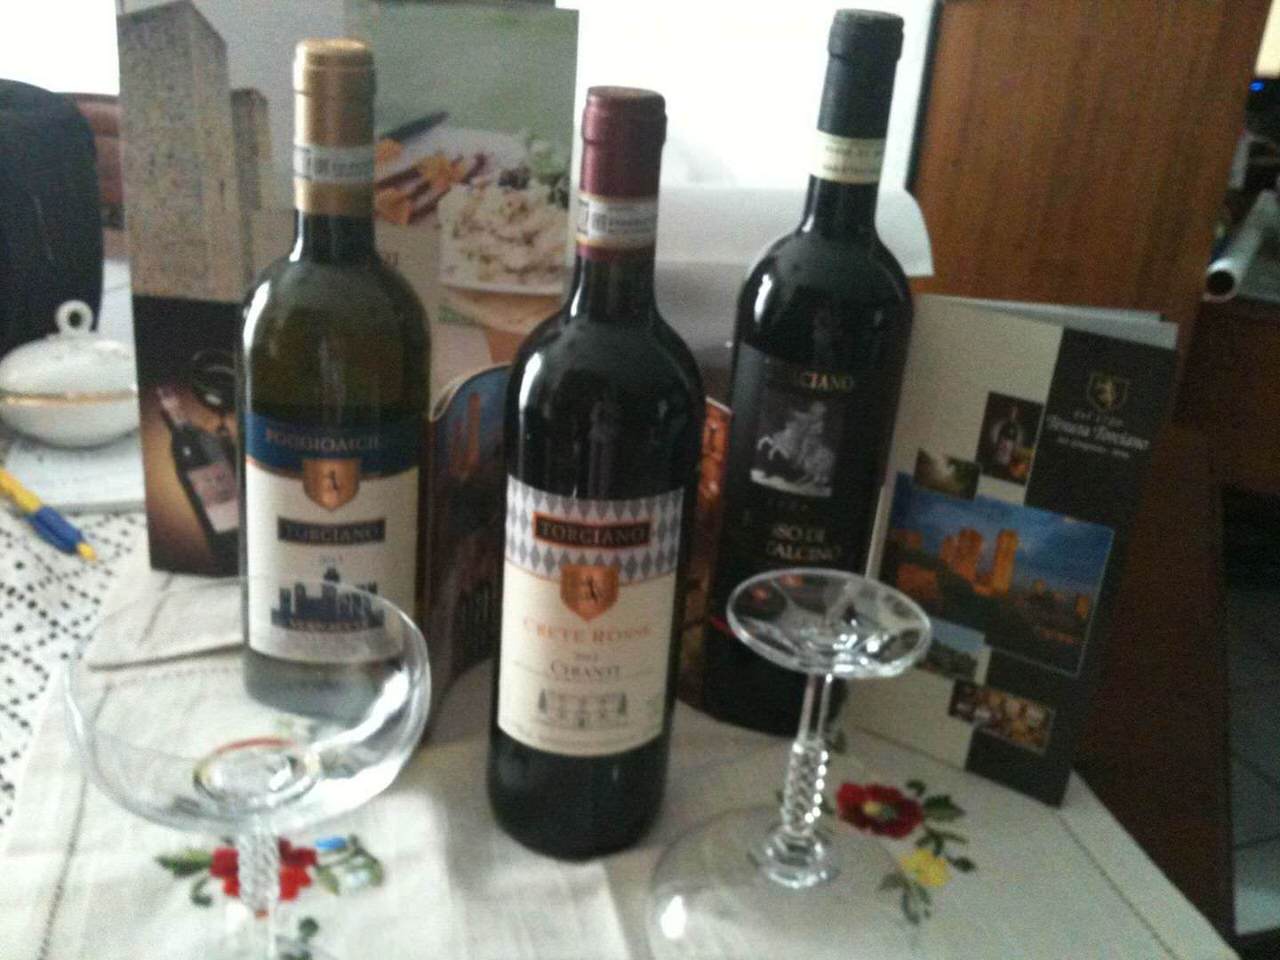 New Italian Review of our wines